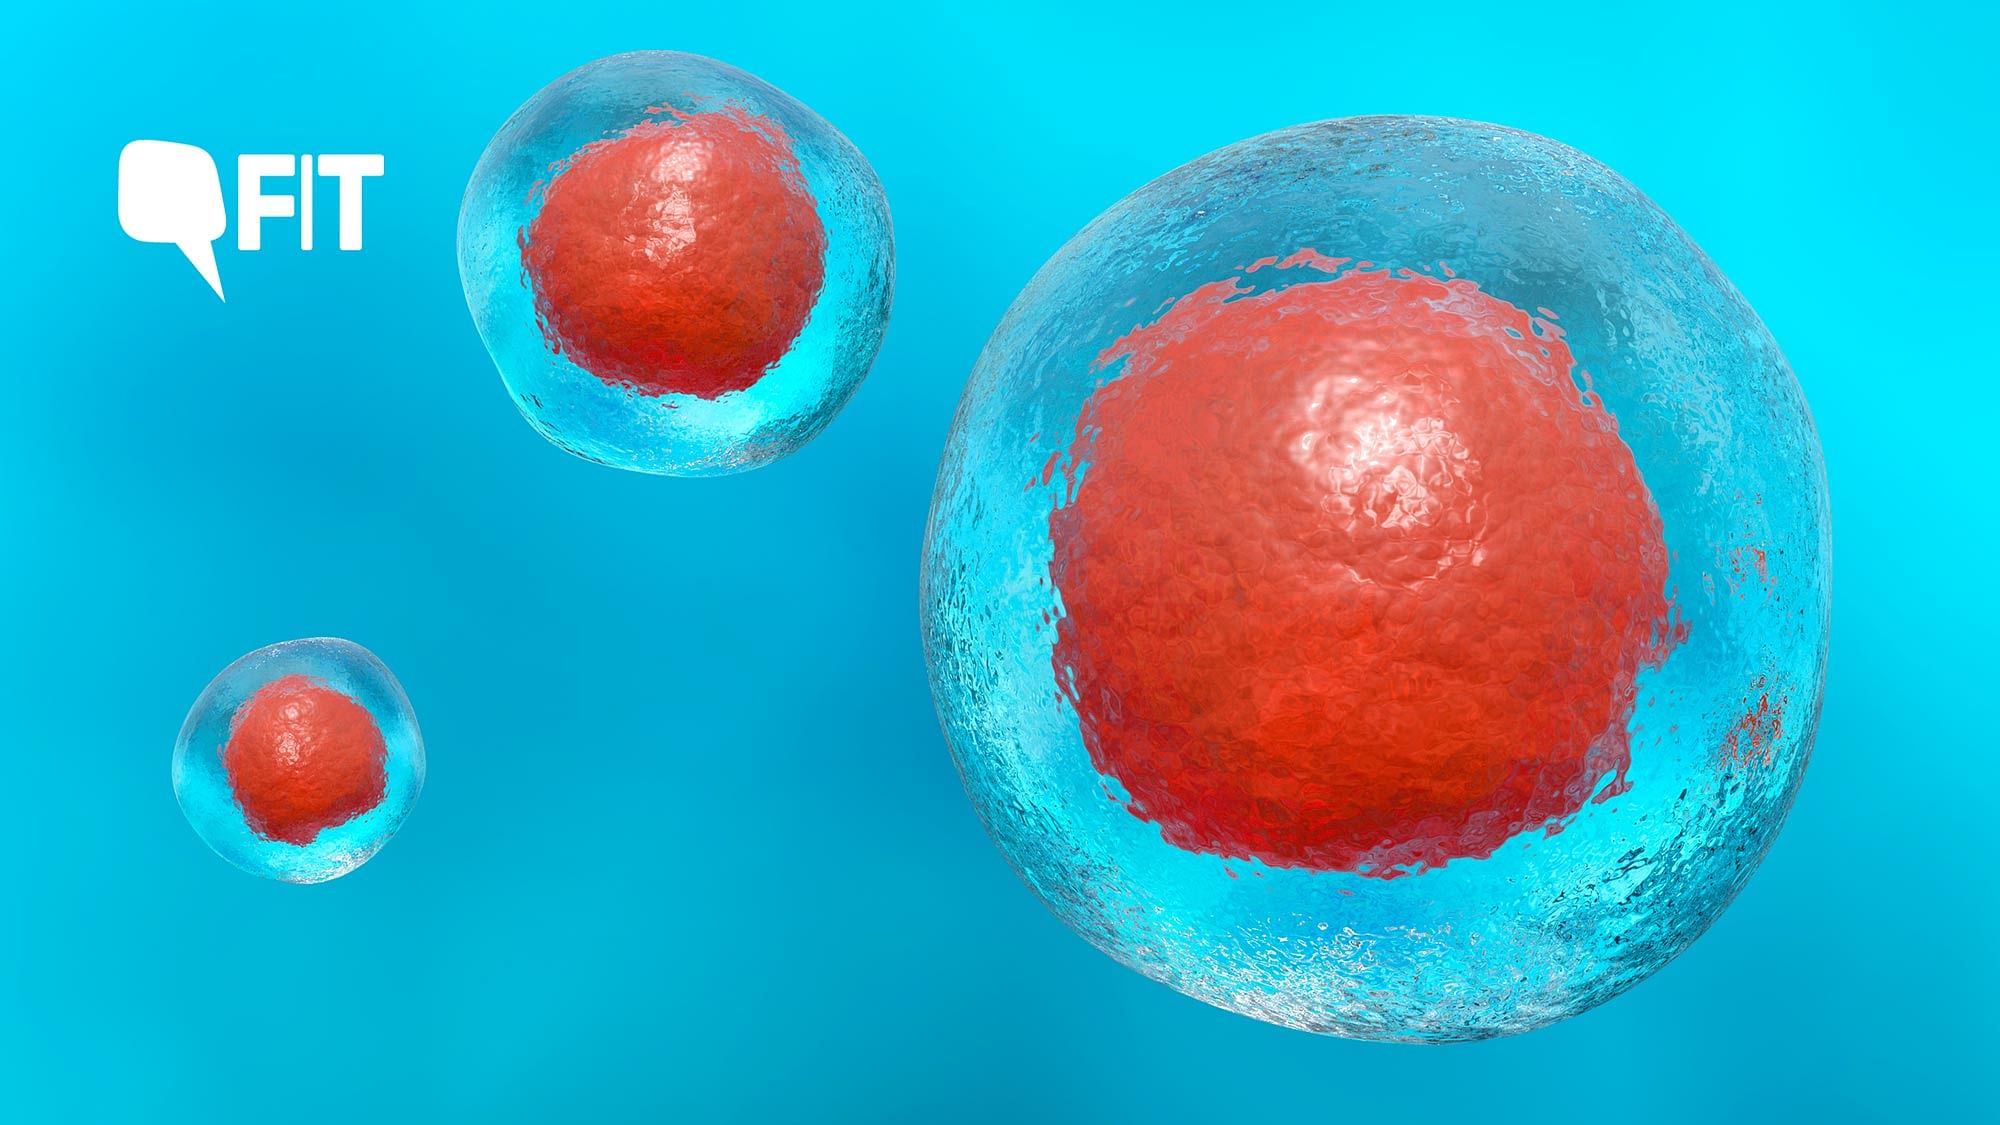 What is the evidence for the efficacy of stem cell therapy and how are doctors approaching the development? FIT explains.